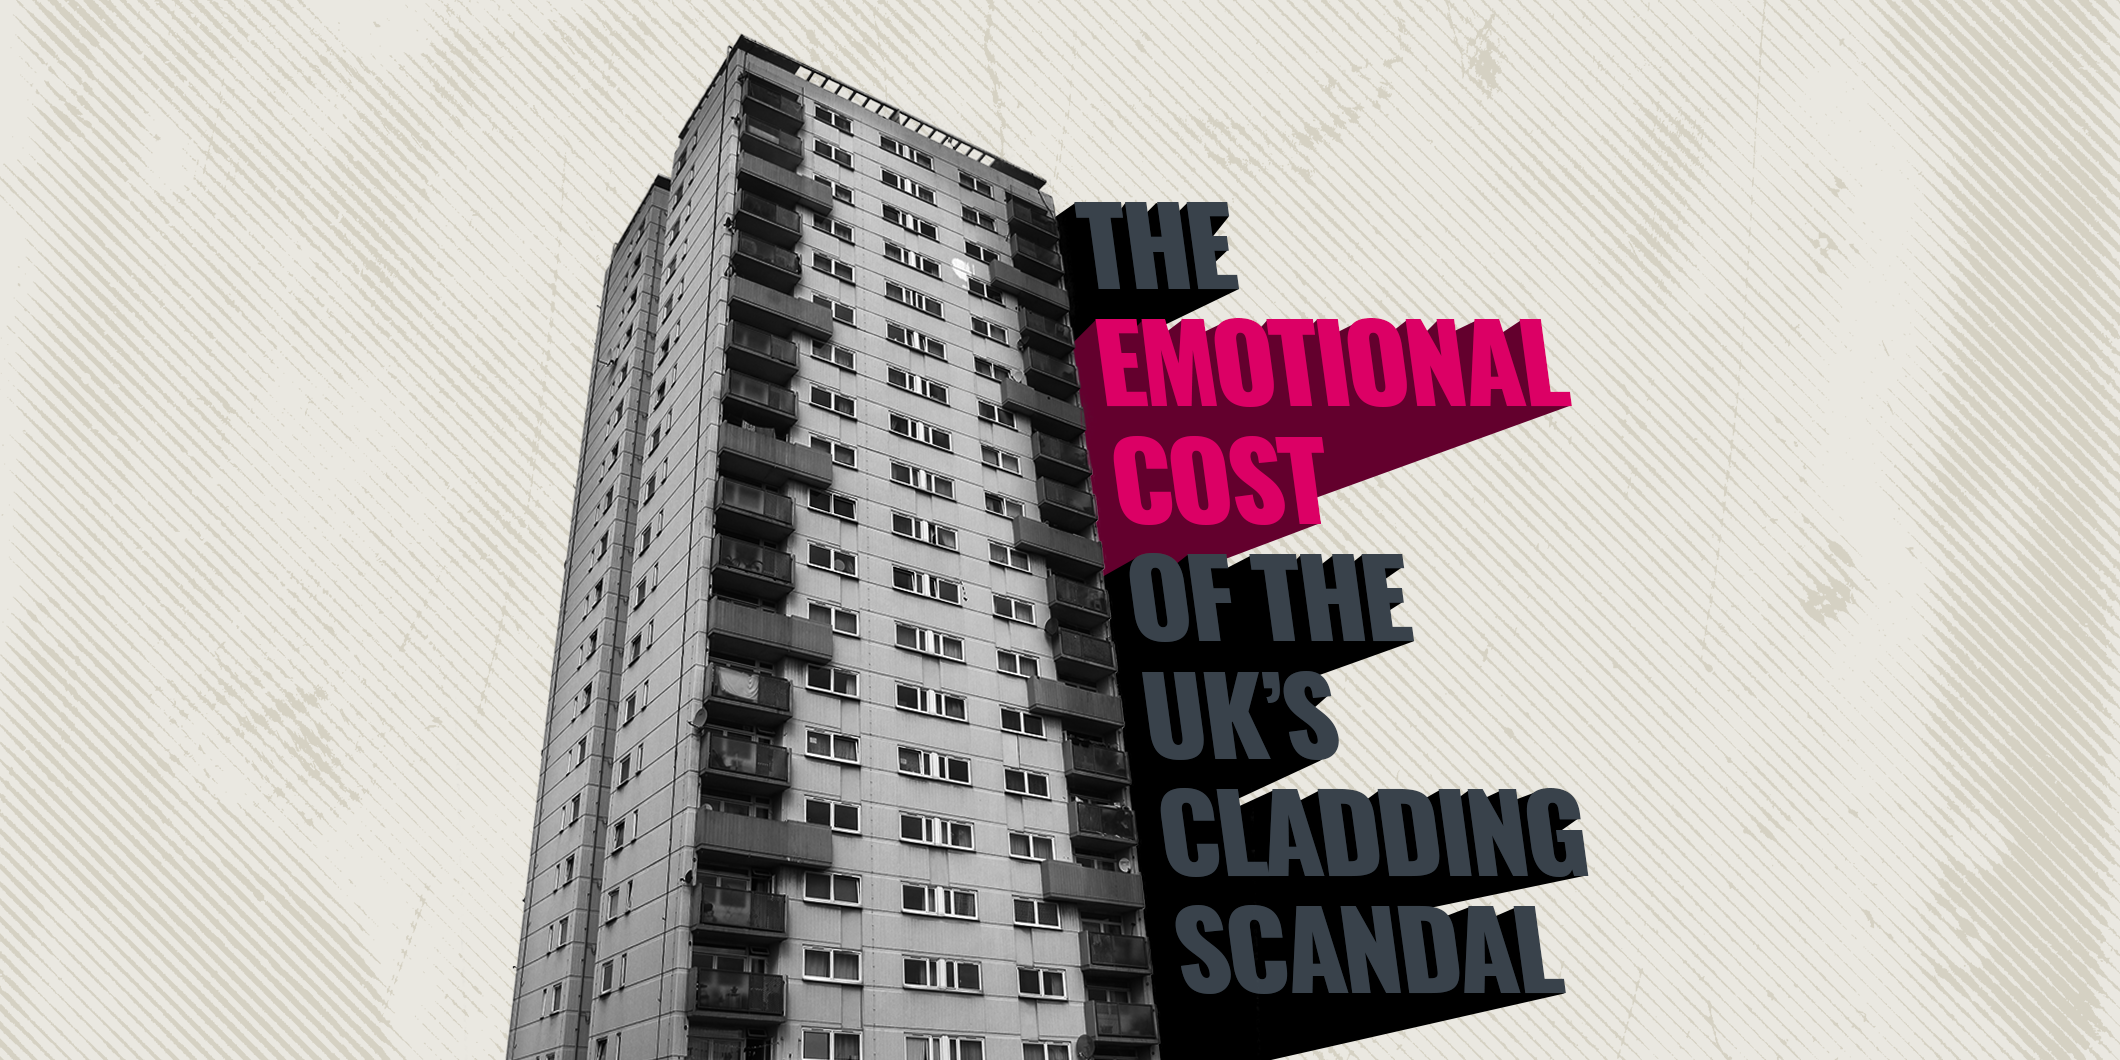 The emotional cost of the UK’s cladding scandal